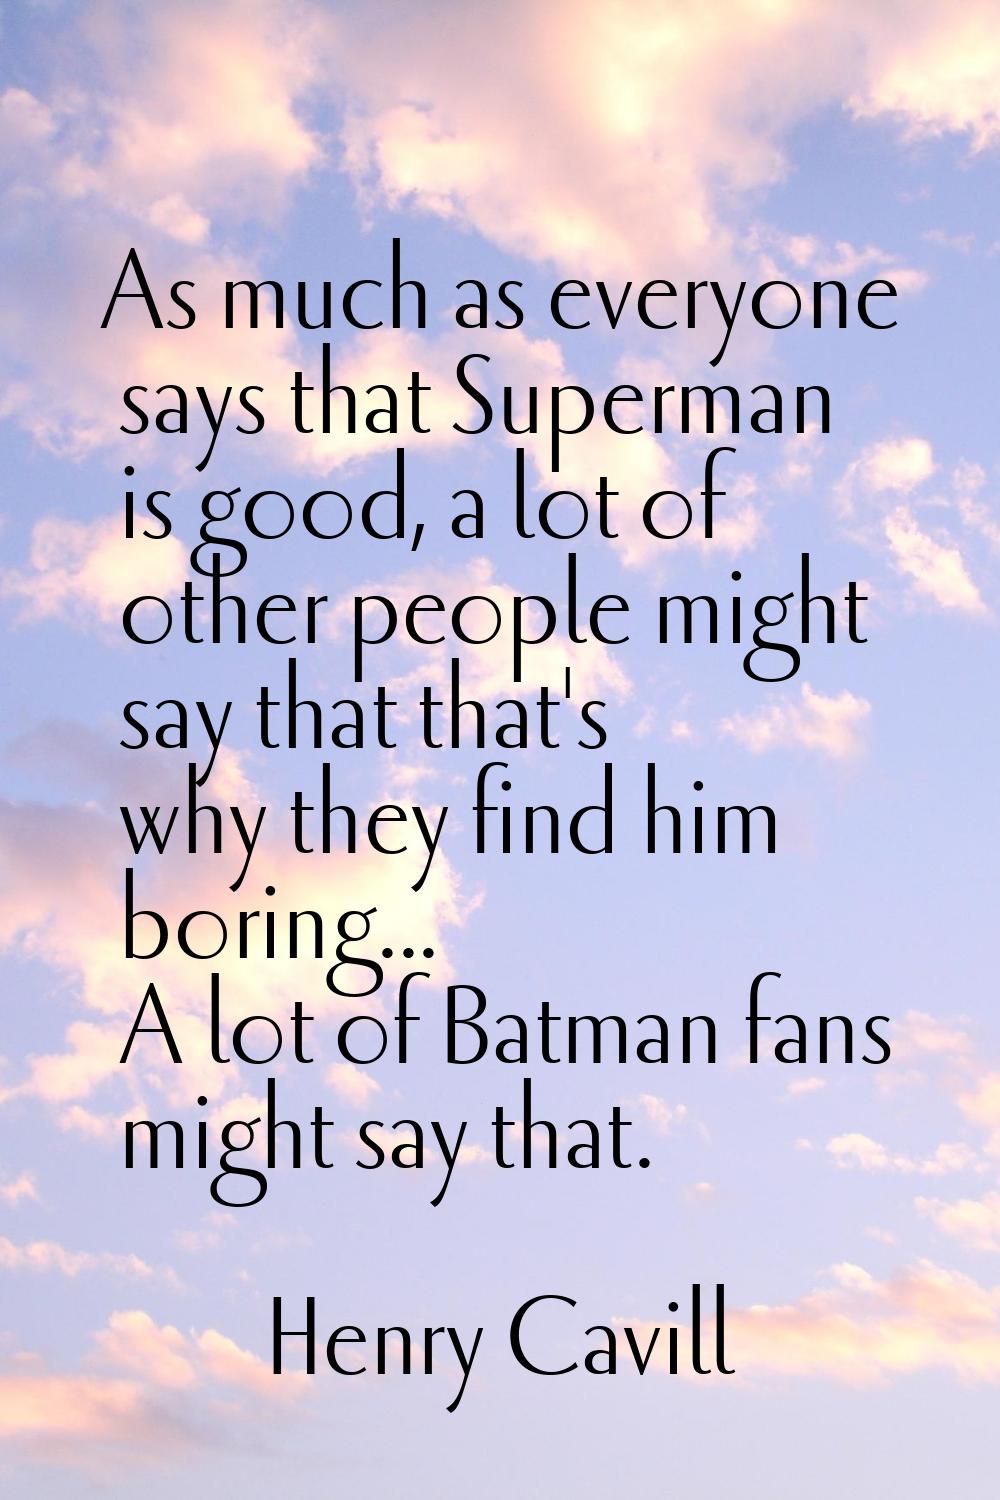 As much as everyone says that Superman is good, a lot of other people might say that that's why the